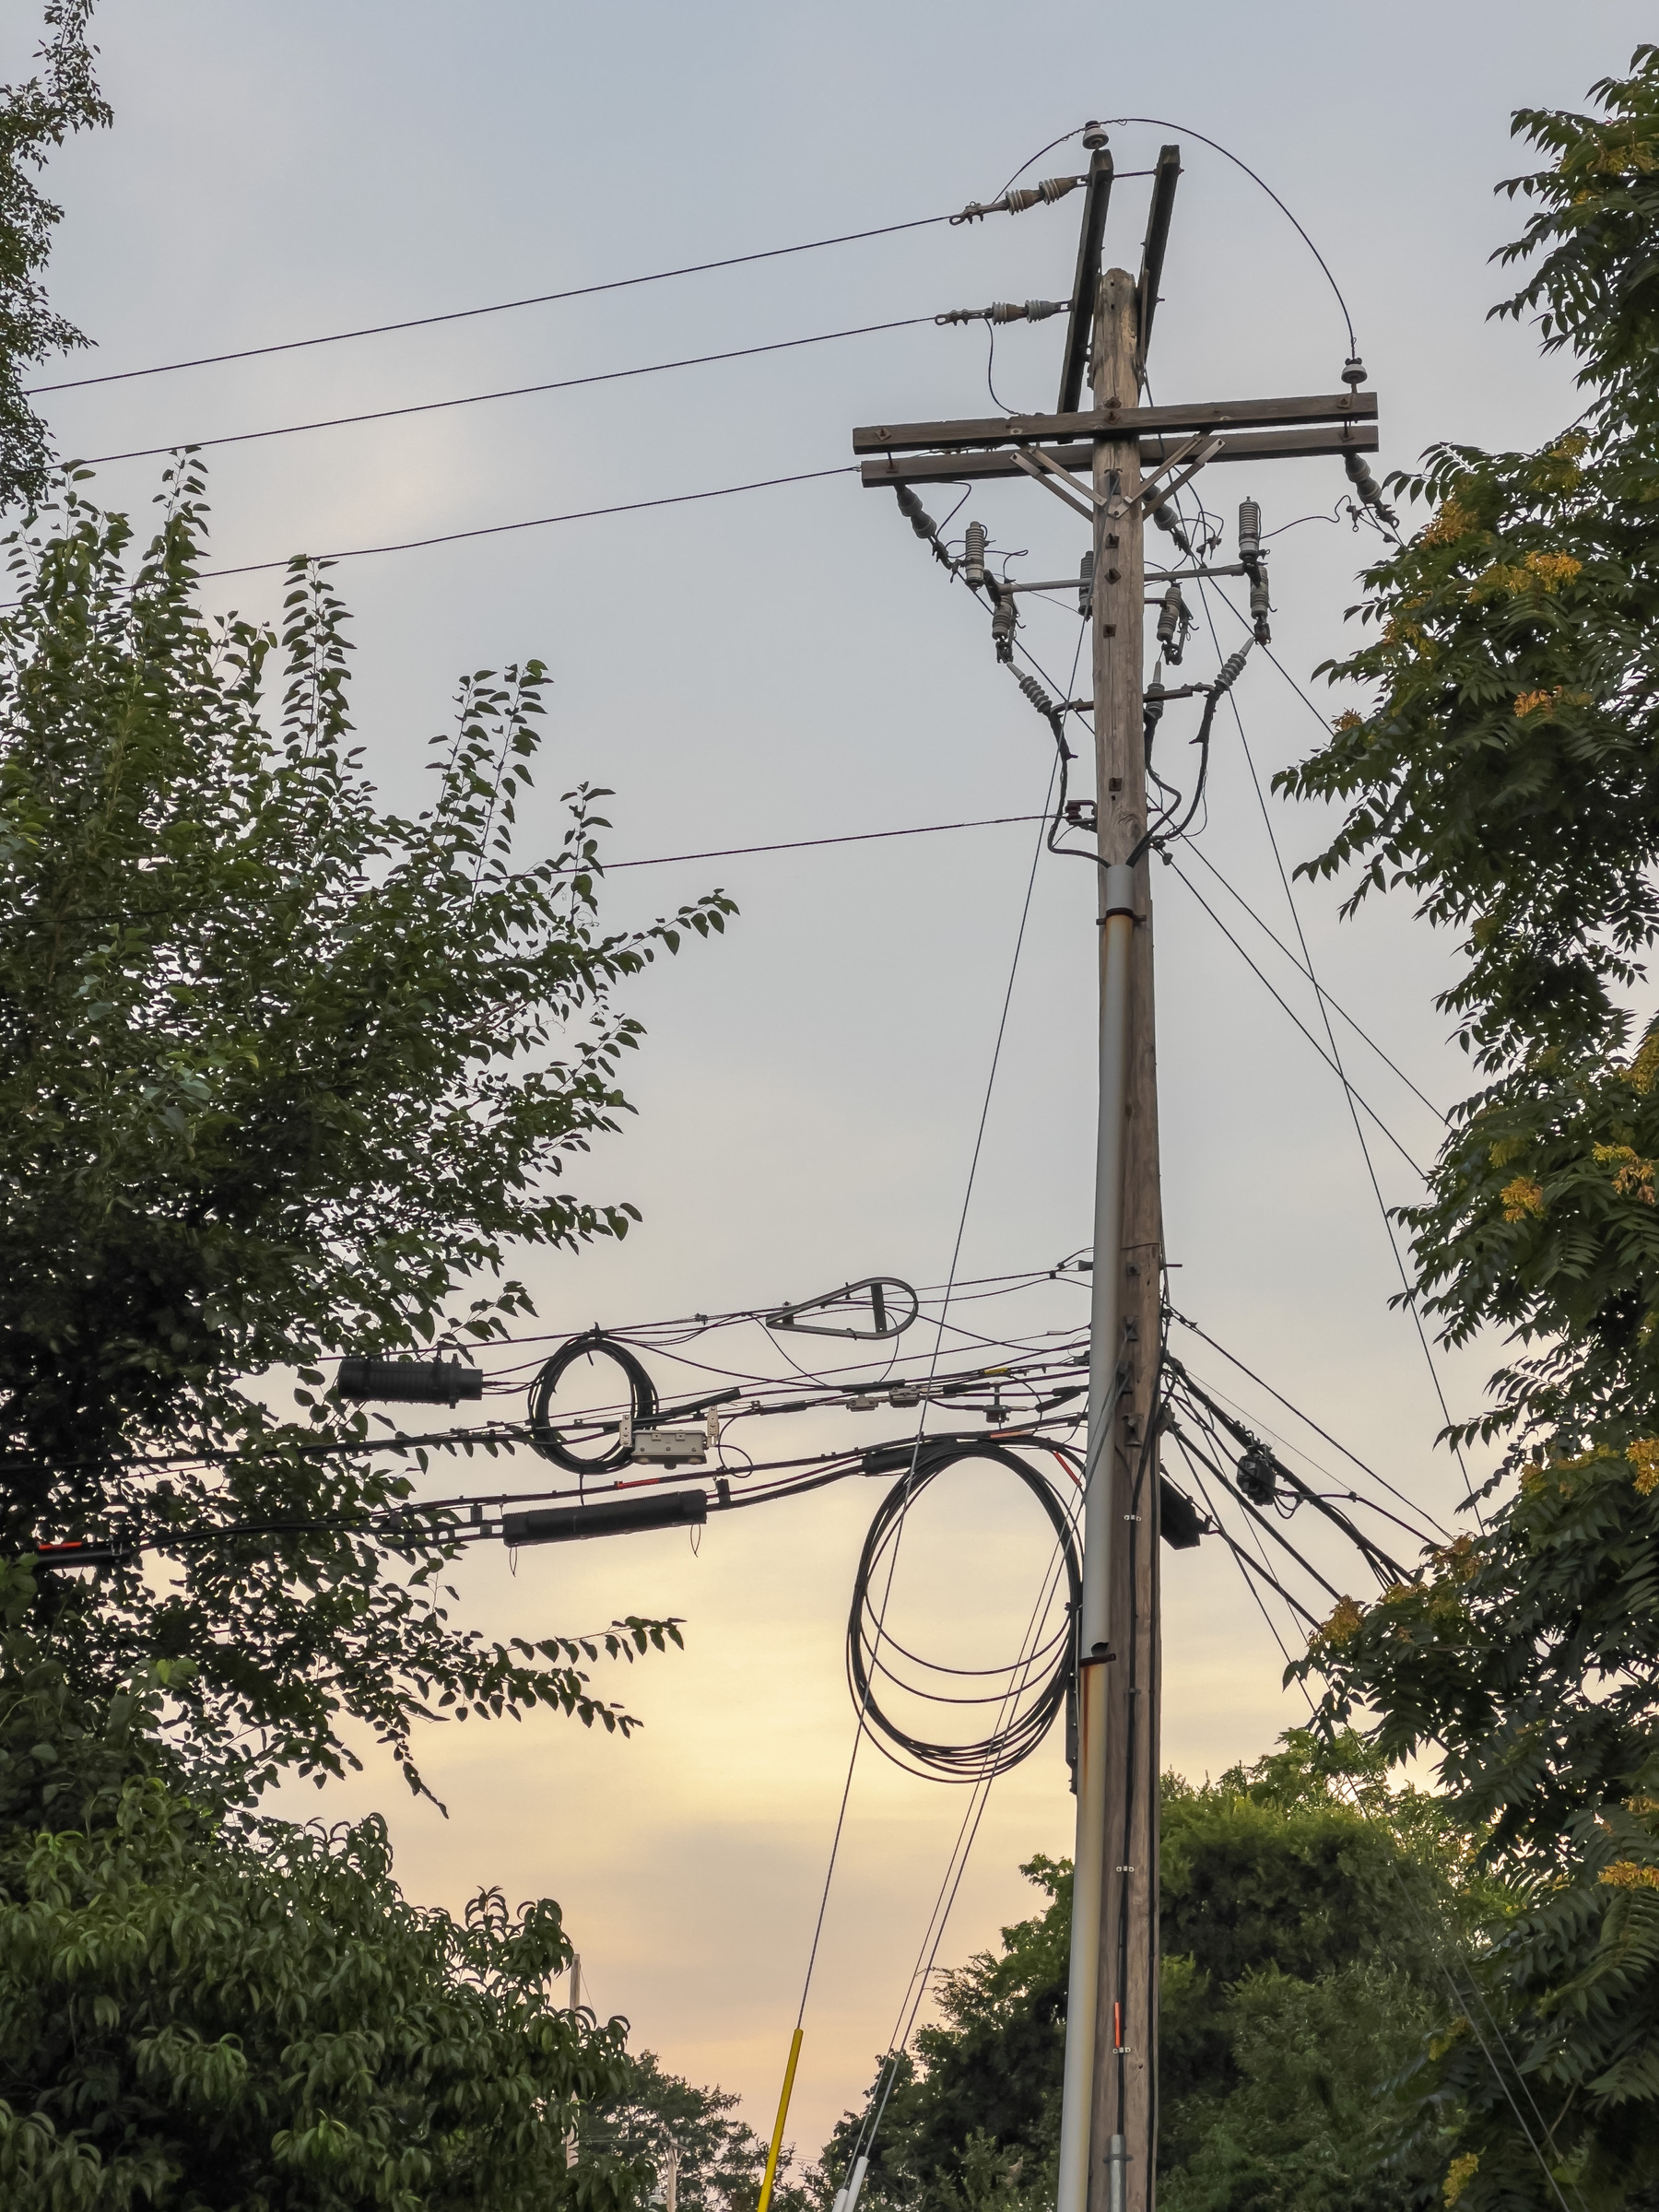 wires and utility pole with trees on either side